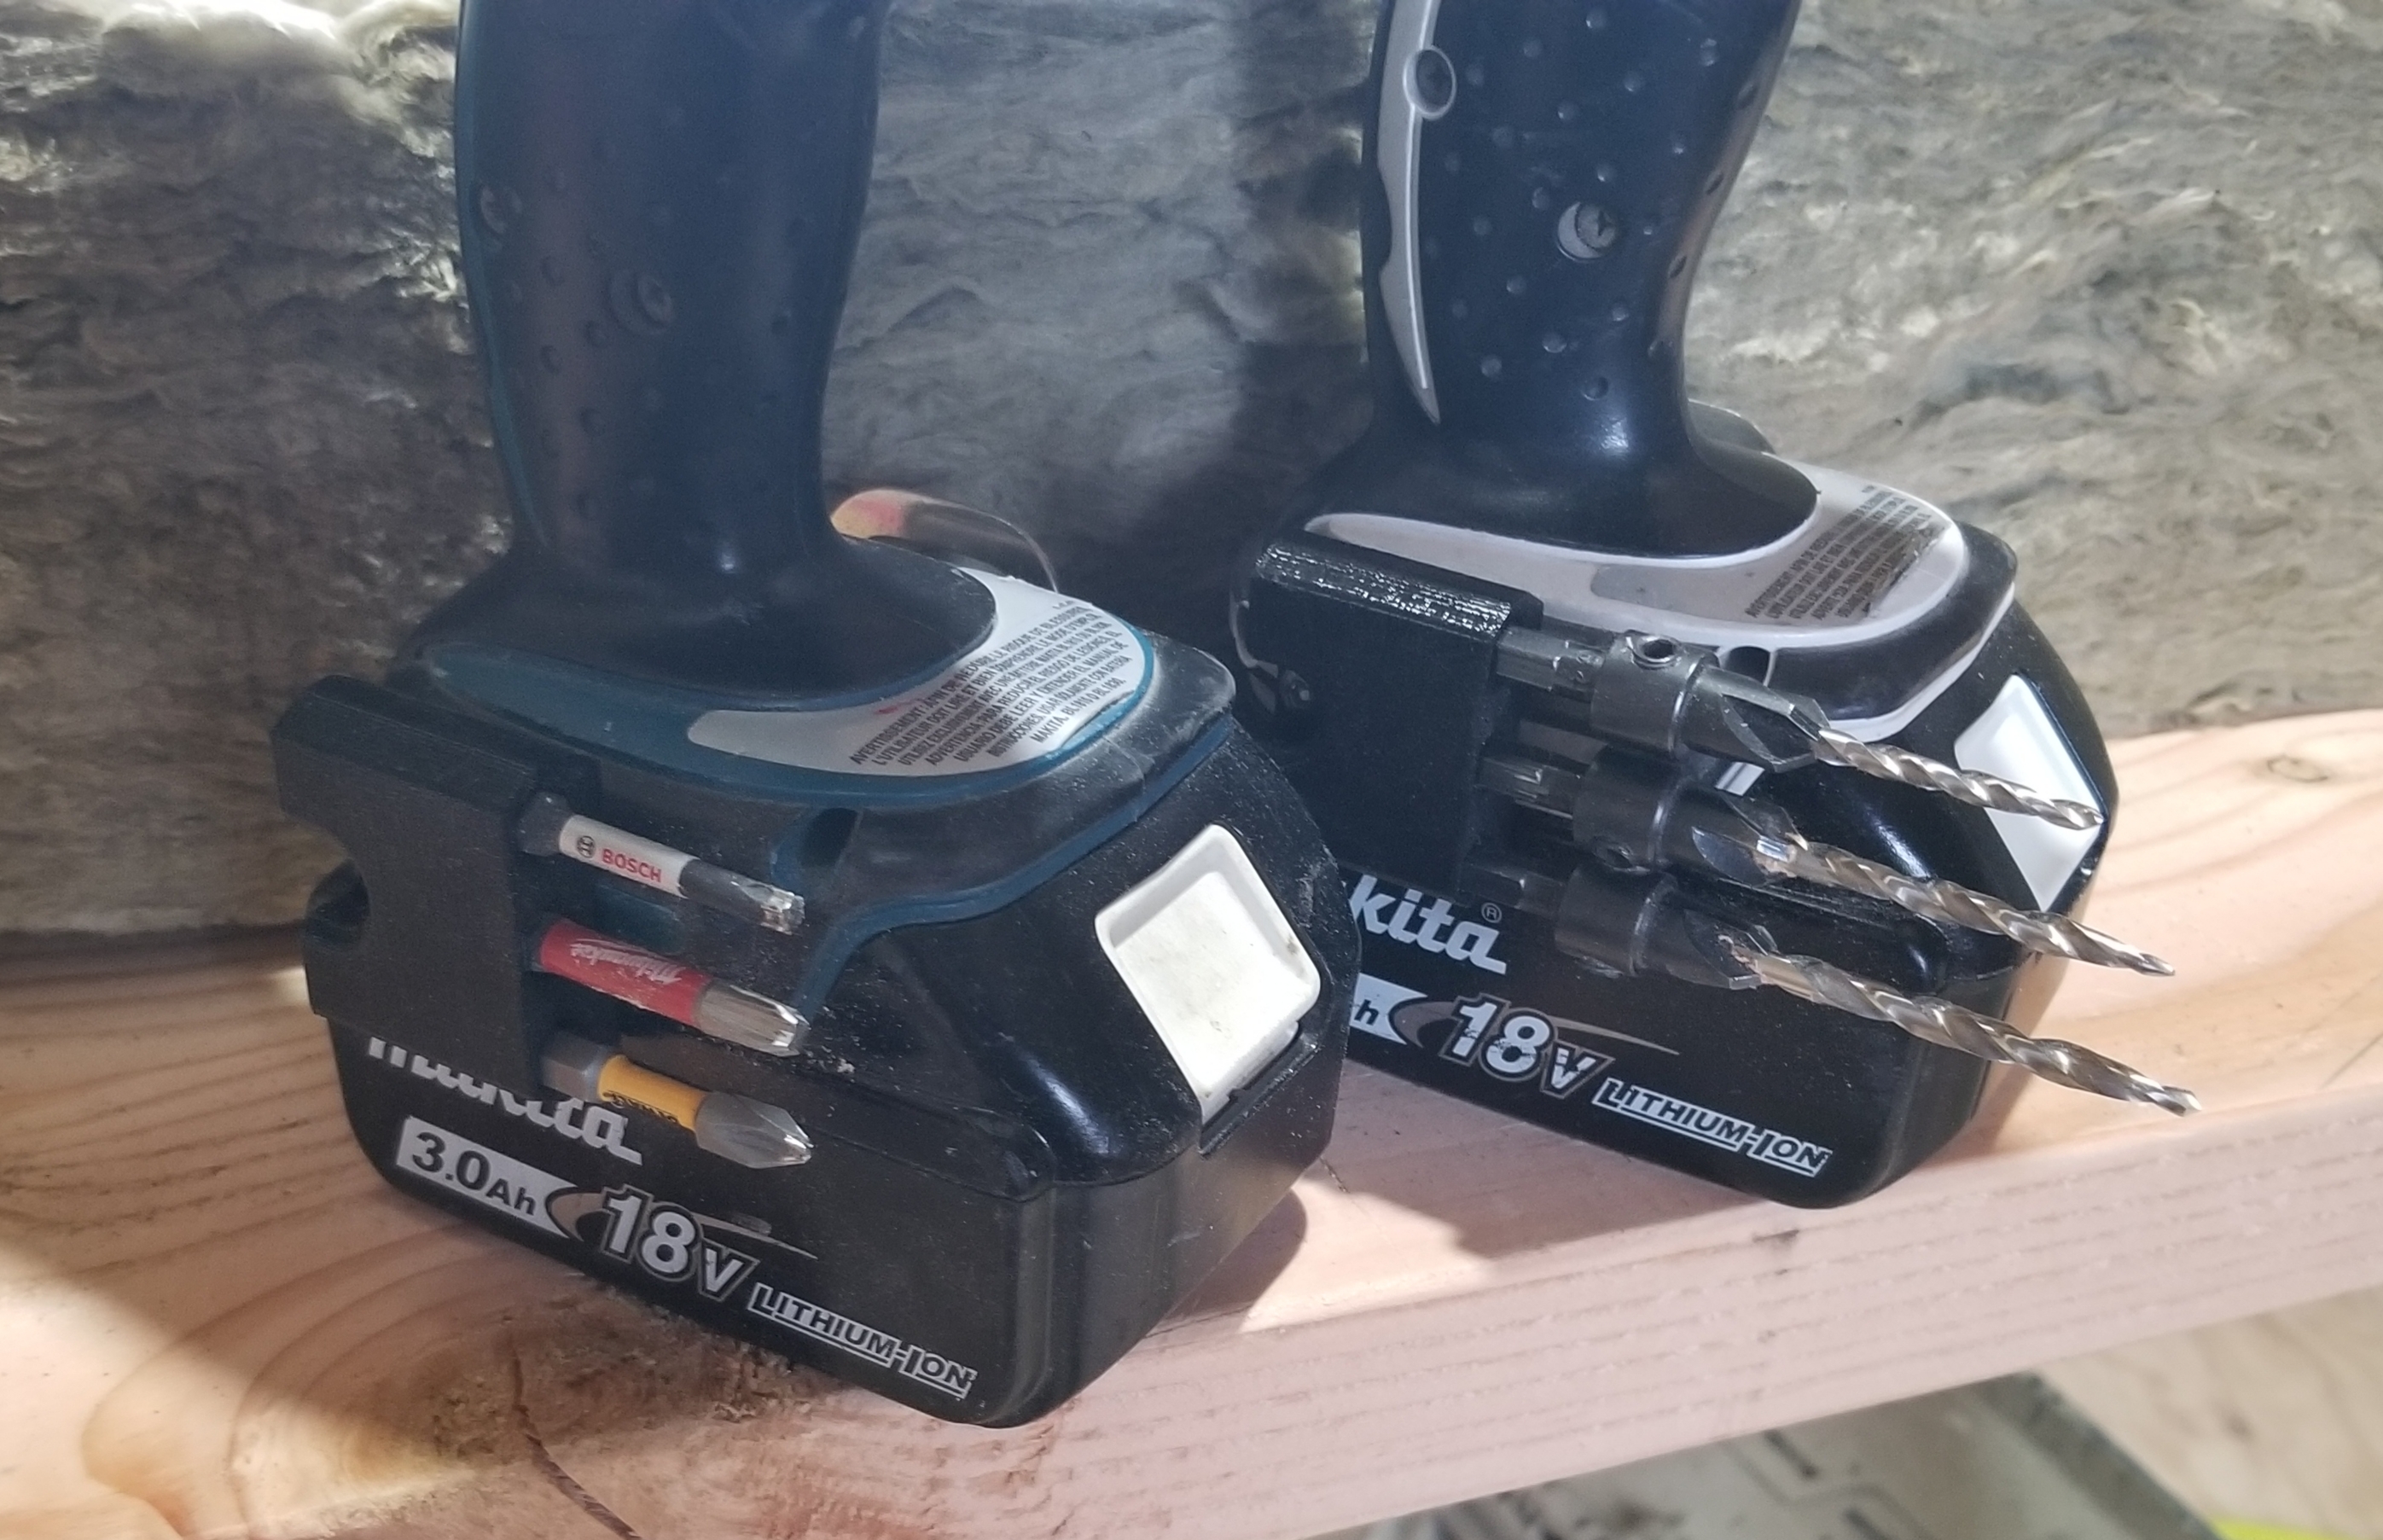 Makita Driver Bit Holster with Strong Bit Retention